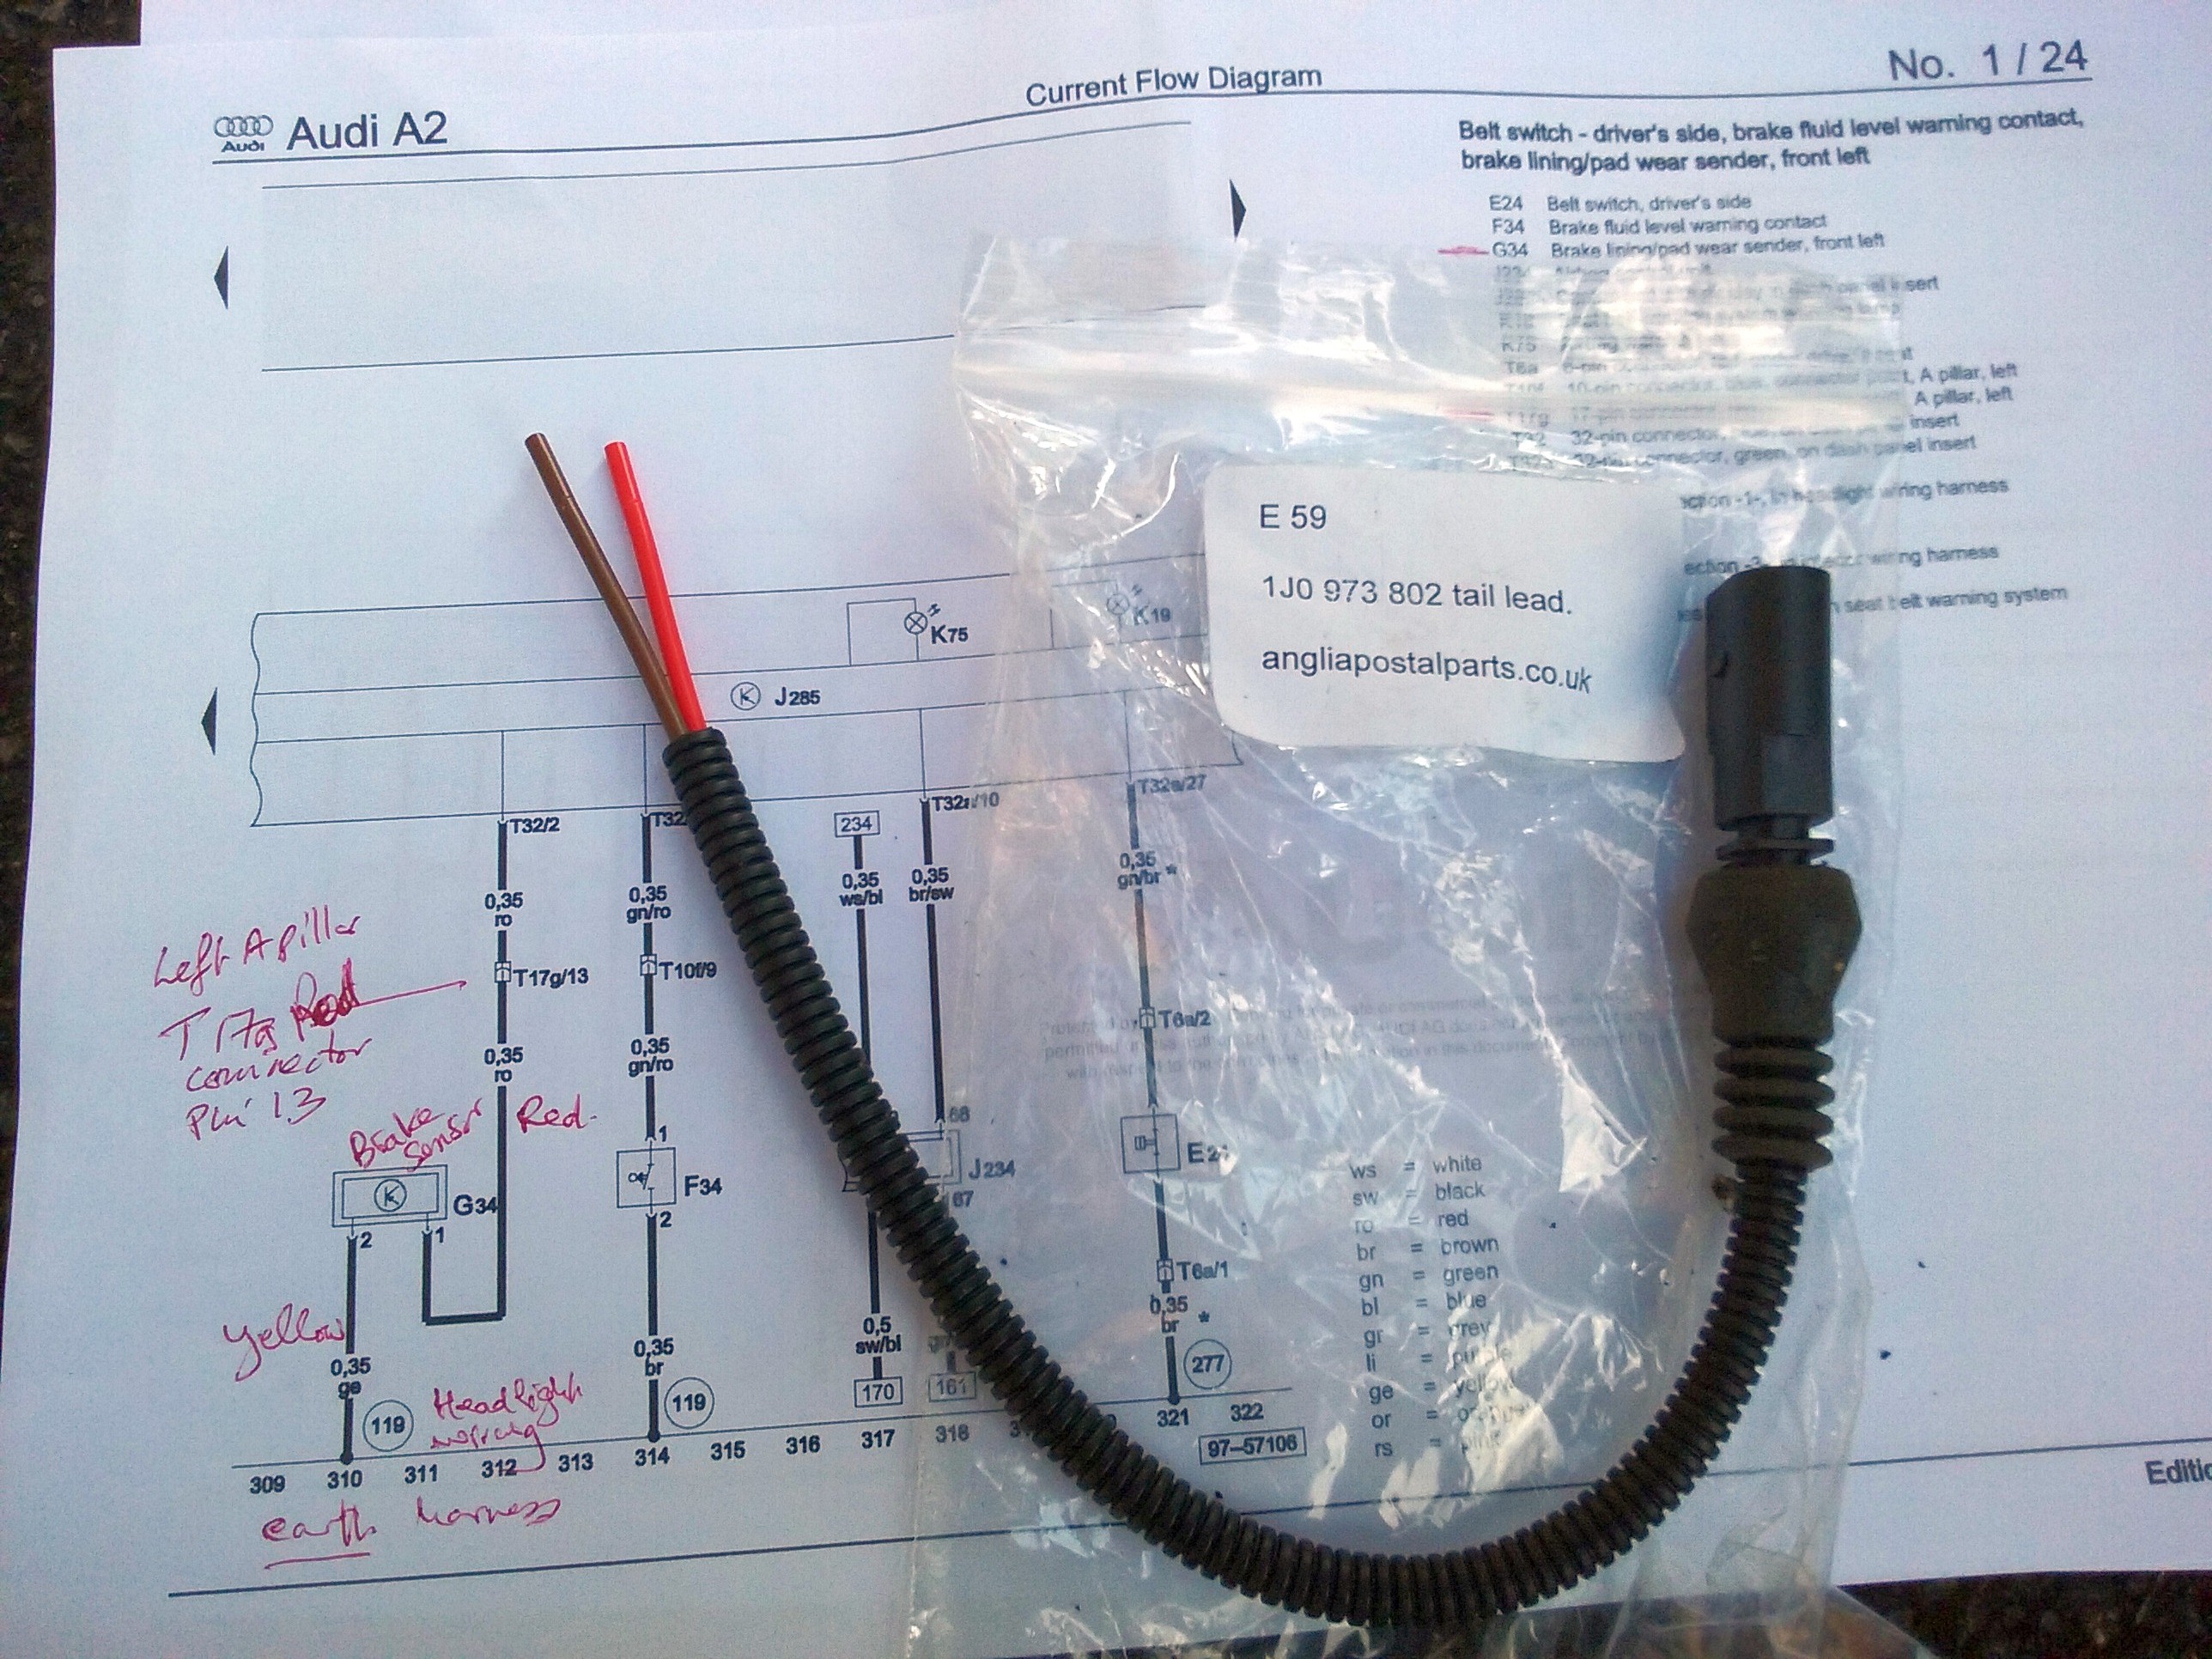 New Short Cable and Circuit Diagram.jpg